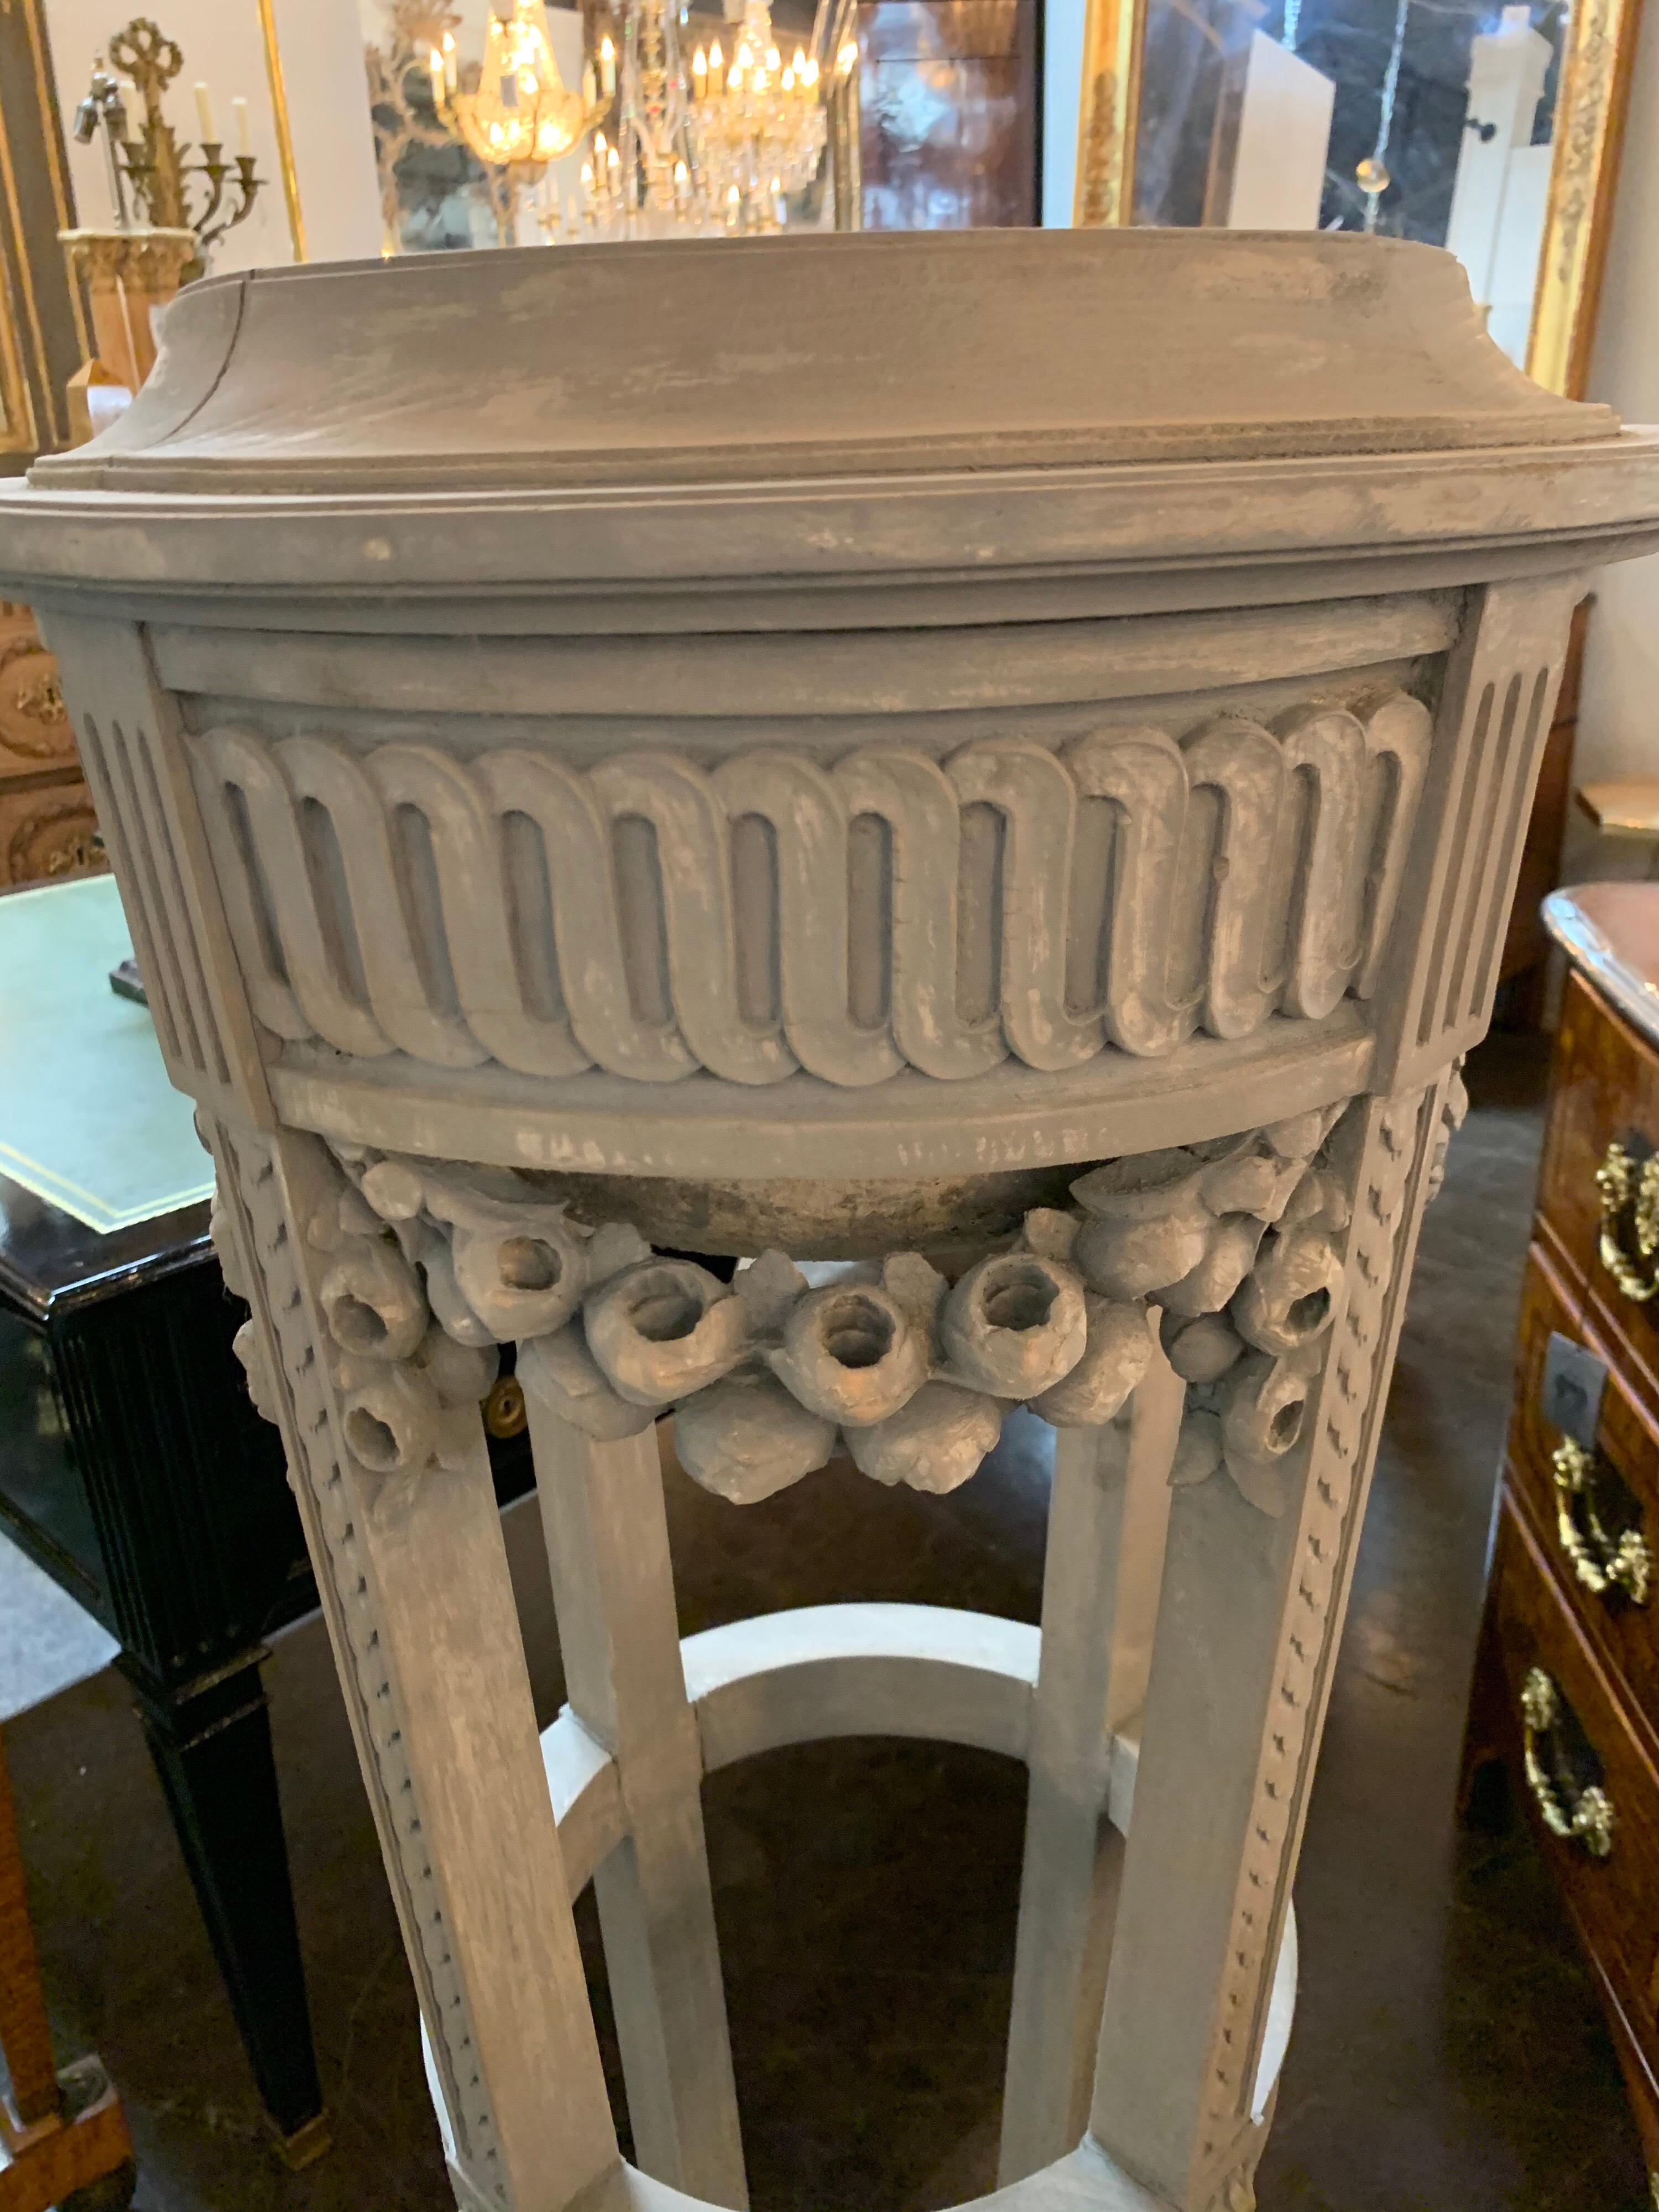 Beautifully carved French 19th century painted planter. The piece is painted with a grey colored wash. A lovely decorative item!